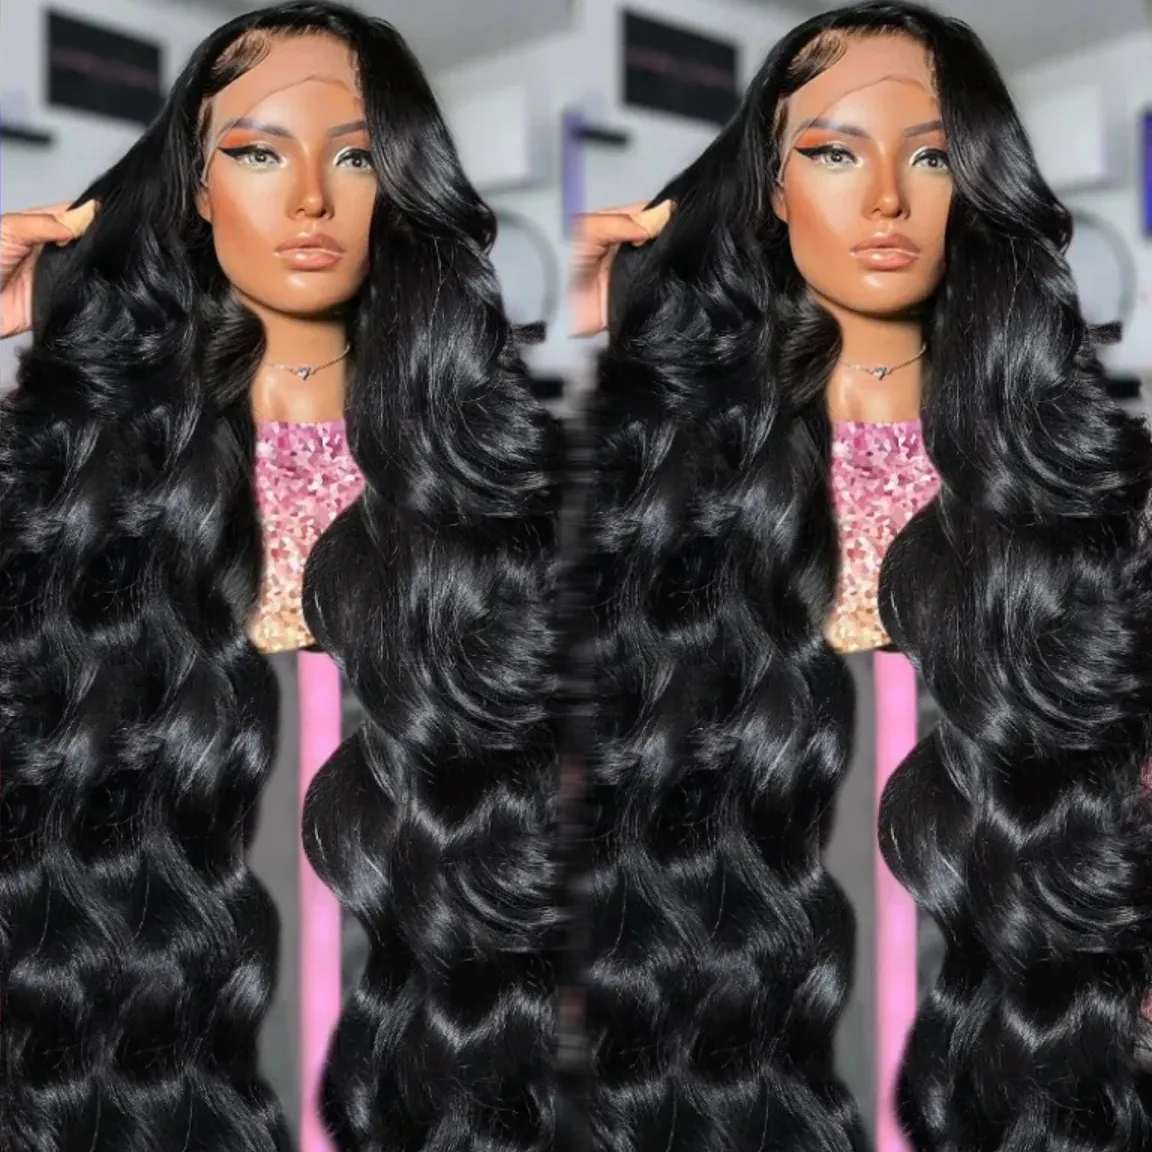 13x6 Raw Indian Lace Frontal Hair Wig ,Glueless Full Lace Front Wigs For Black Women,Brazilian body wave Lace Front wig